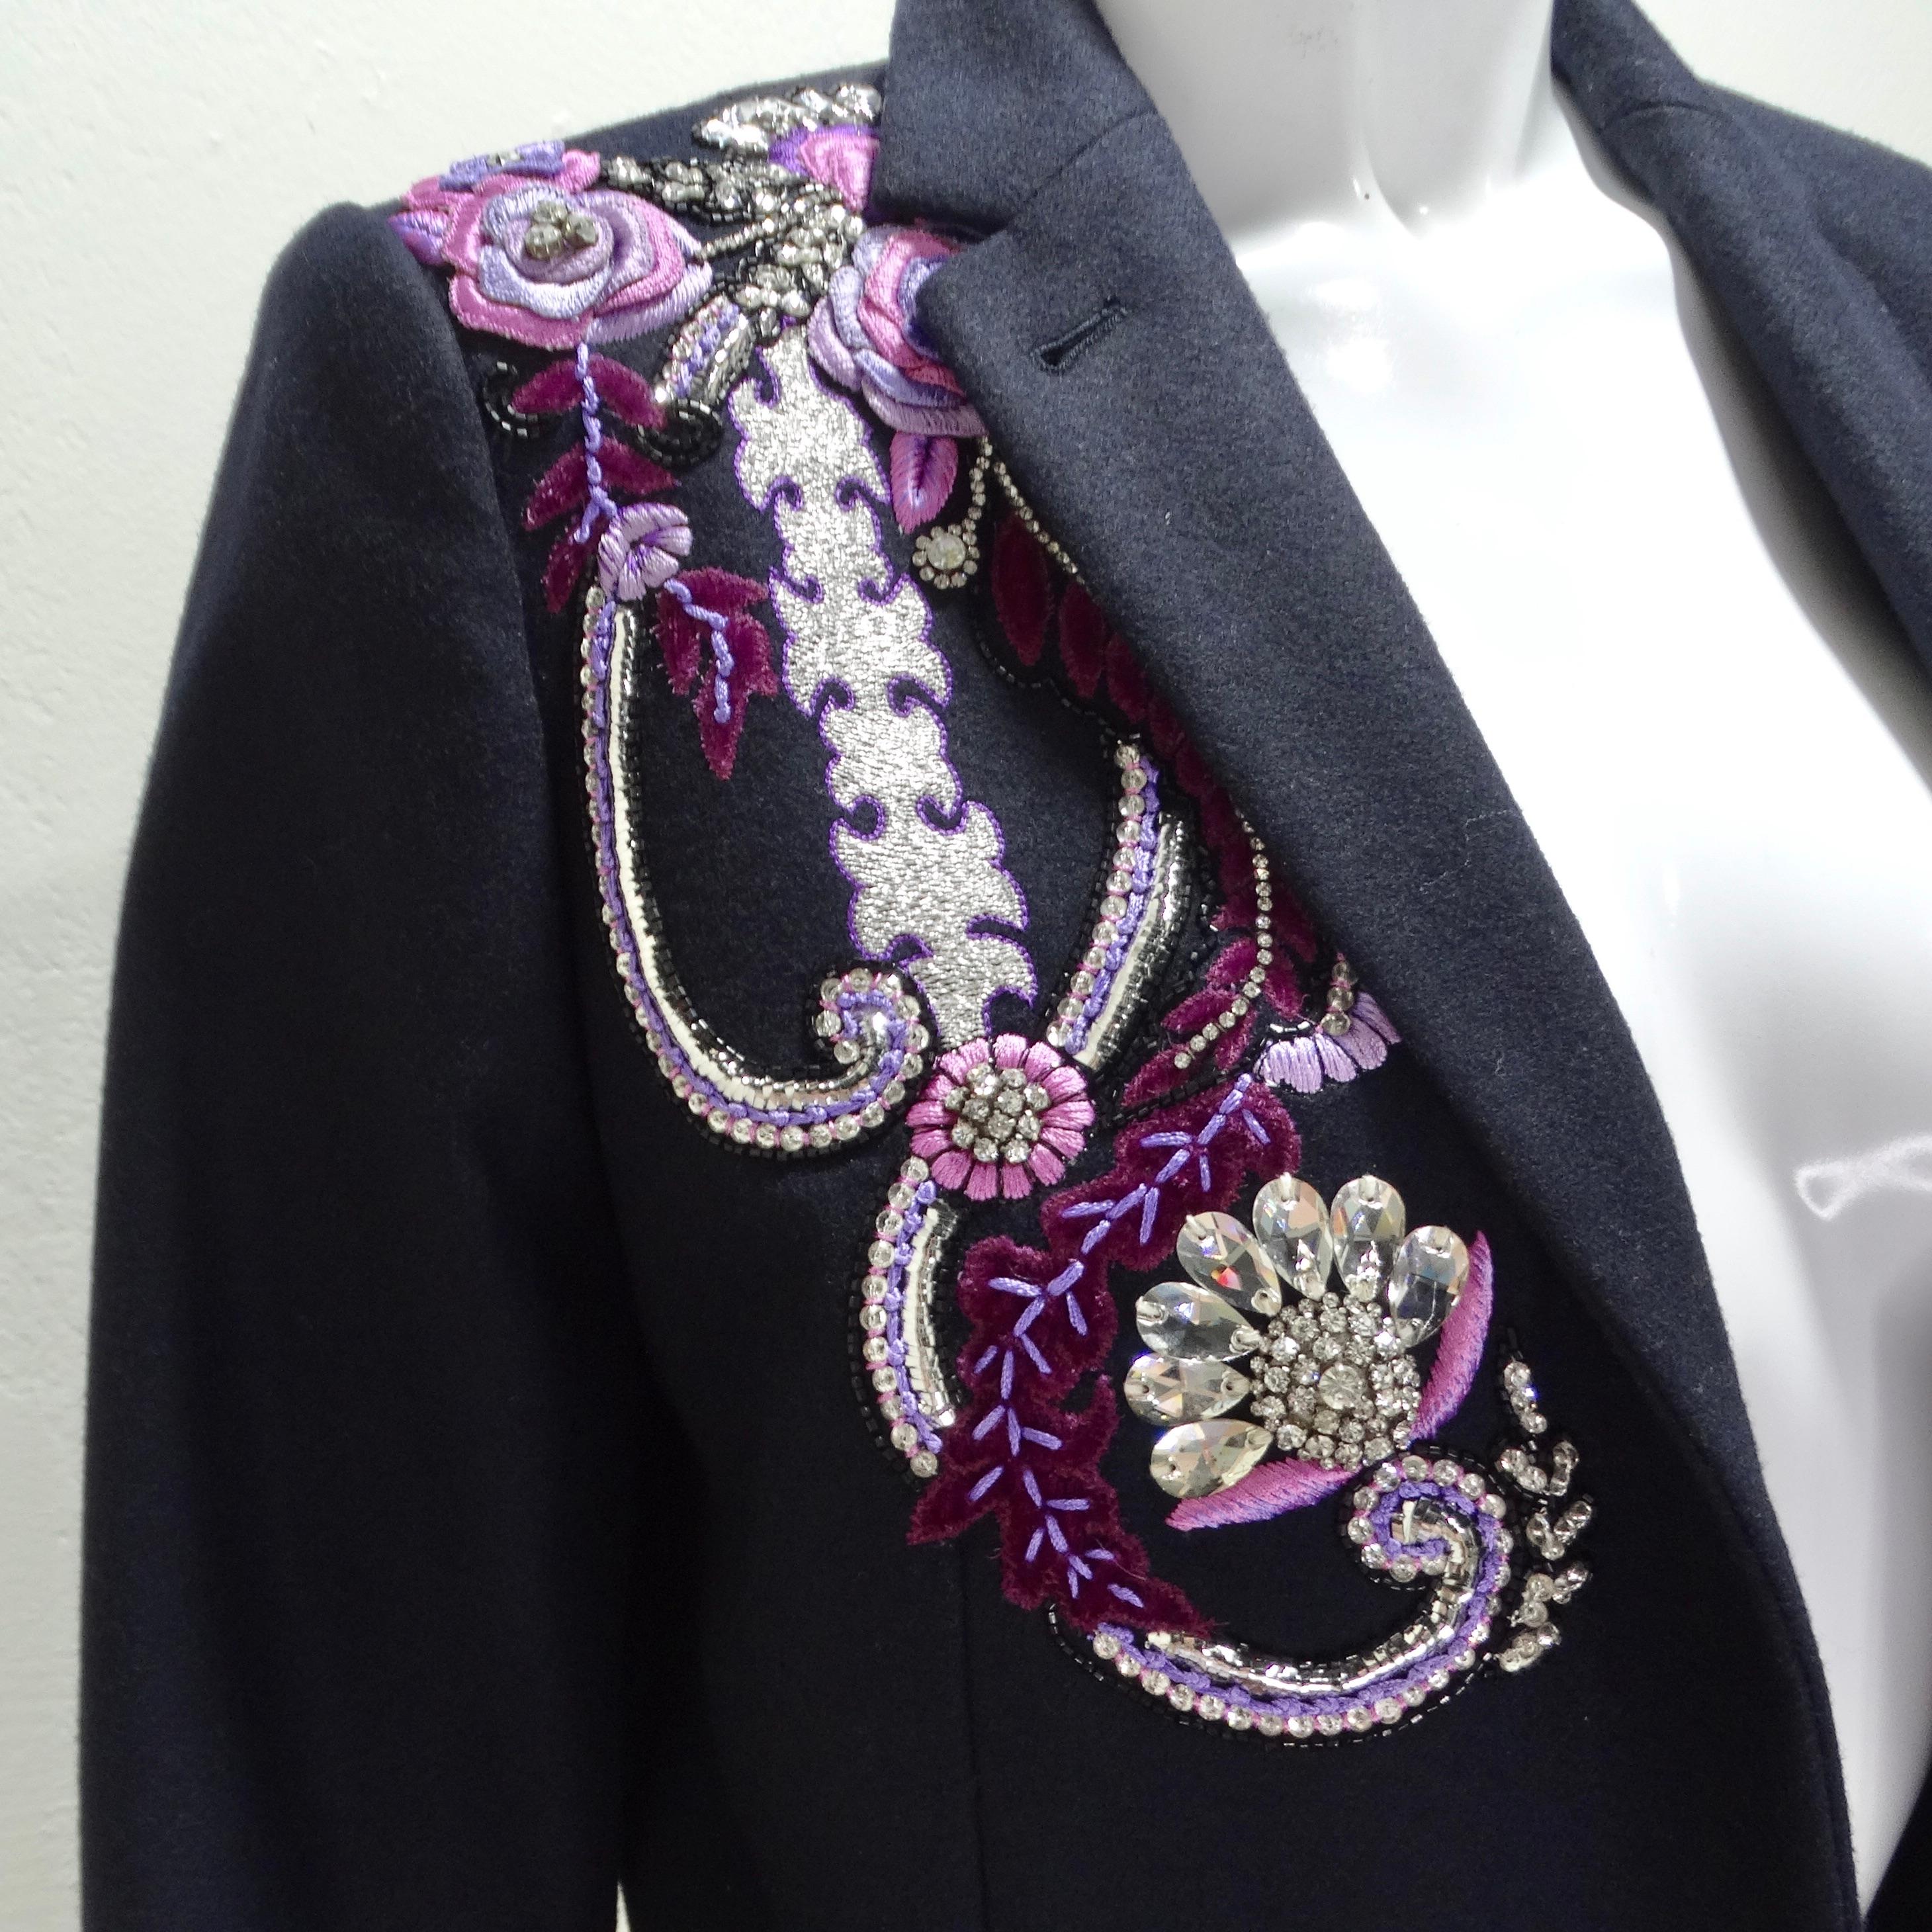 Introducing the exquisite Dries Van Noten Navy Crystal Embroidered Blazer, a timeless and luxurious piece that exudes sophistication and style. Crafted from classic navy fabric, this blazer features a whimsical paisley embroidery on the right